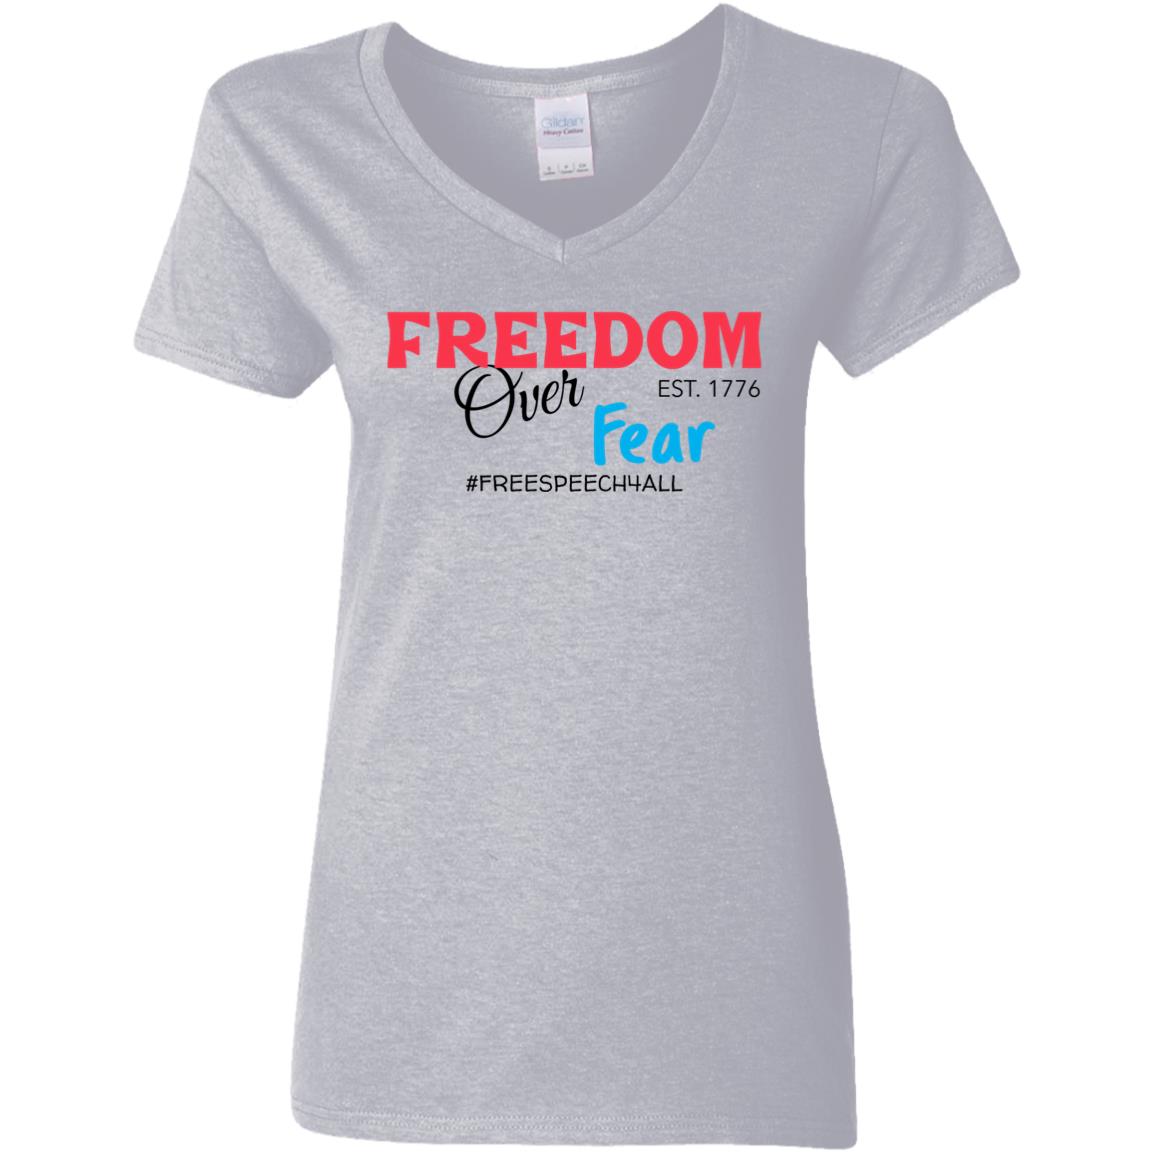 Freedom Over Fear Ladies' 5.3 oz. V-Neck T-Shirt